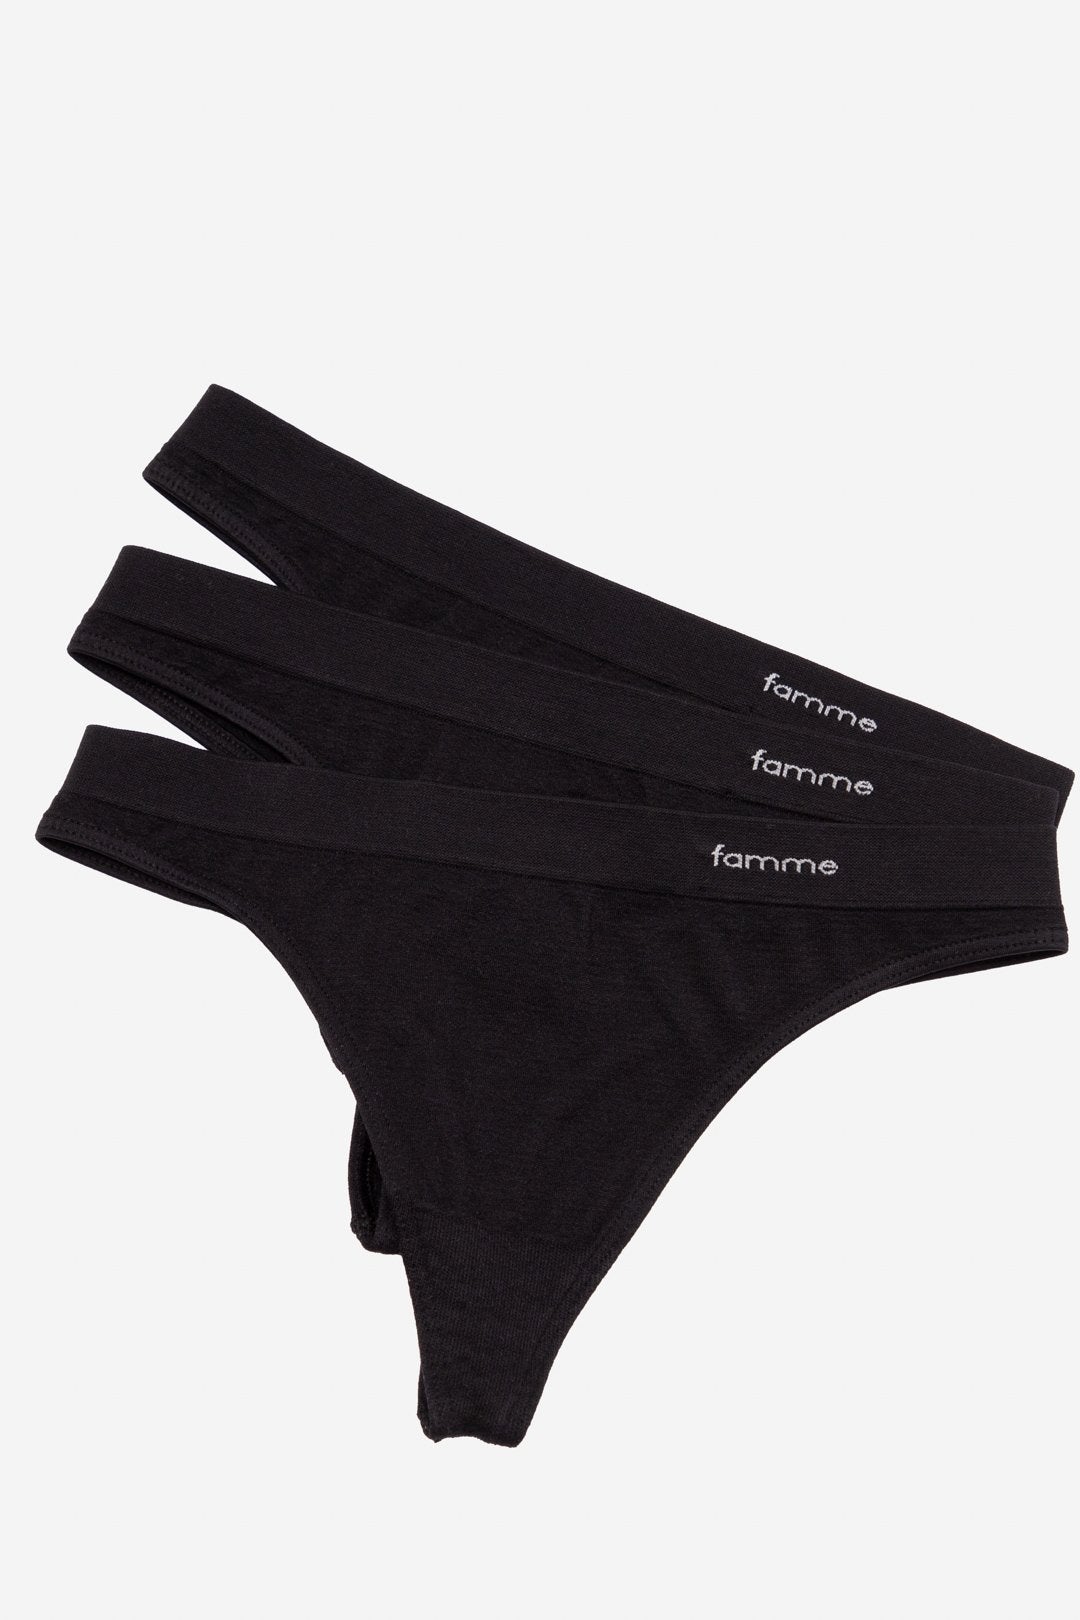 Calvin Klein Invisibles 3-Pack Seamless Thong